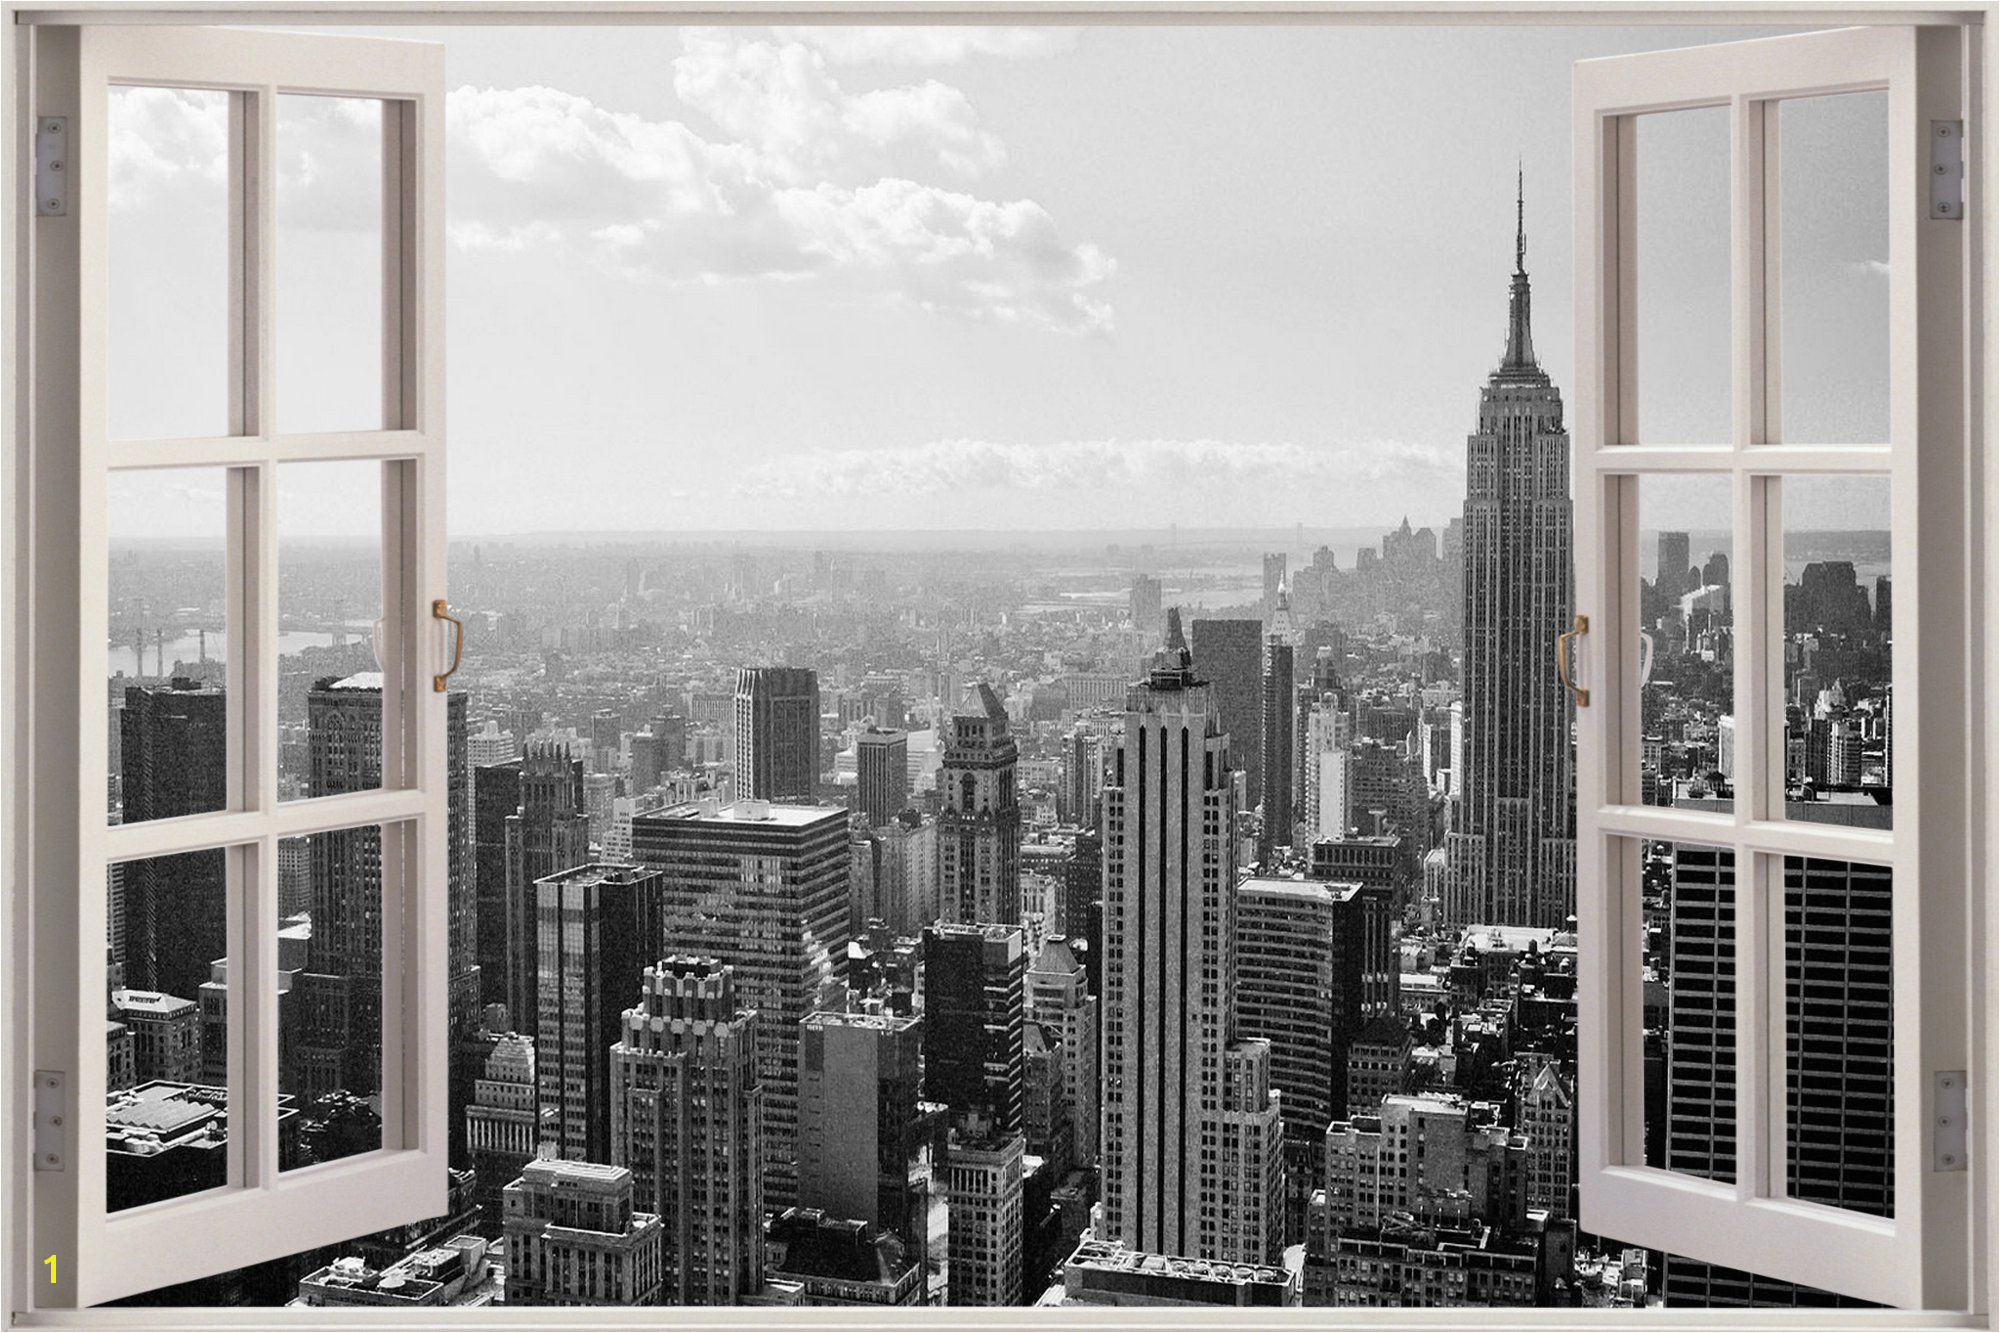 New York Wall Murals for Bedrooms Huge 3d Window New York City View Wall Stickers Mural Art Decal